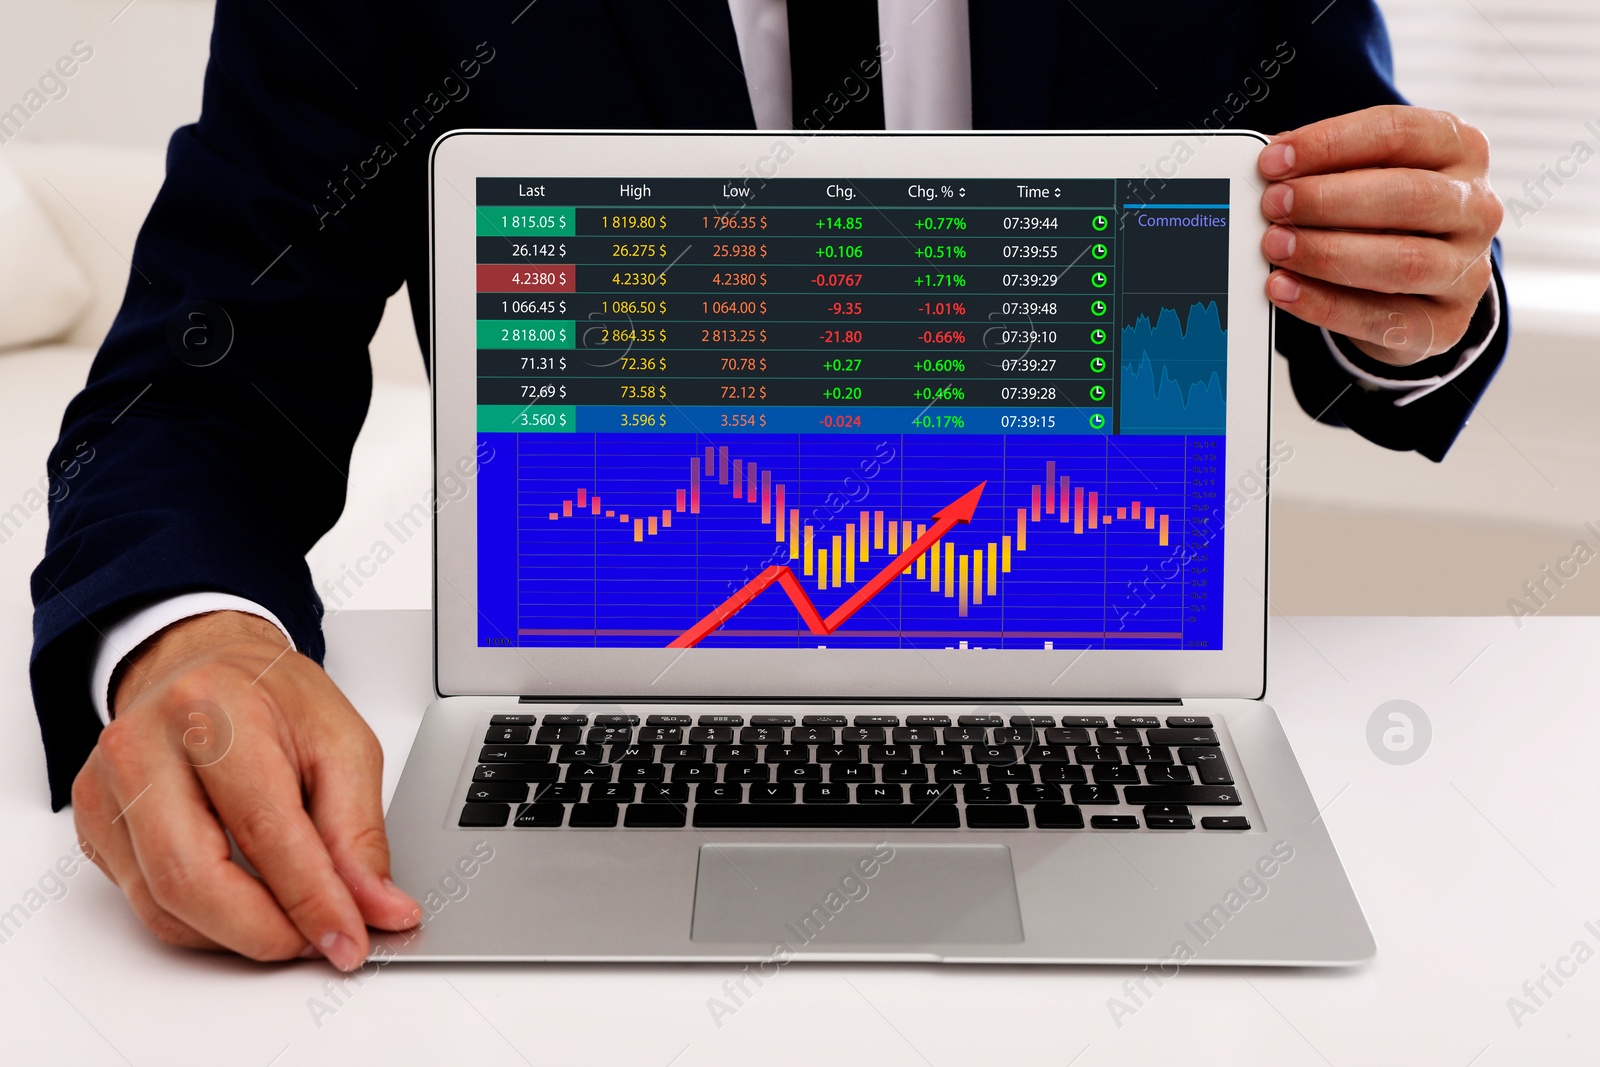 Image of Stock exchange. Man showing data and graph on screen via laptop, closeup